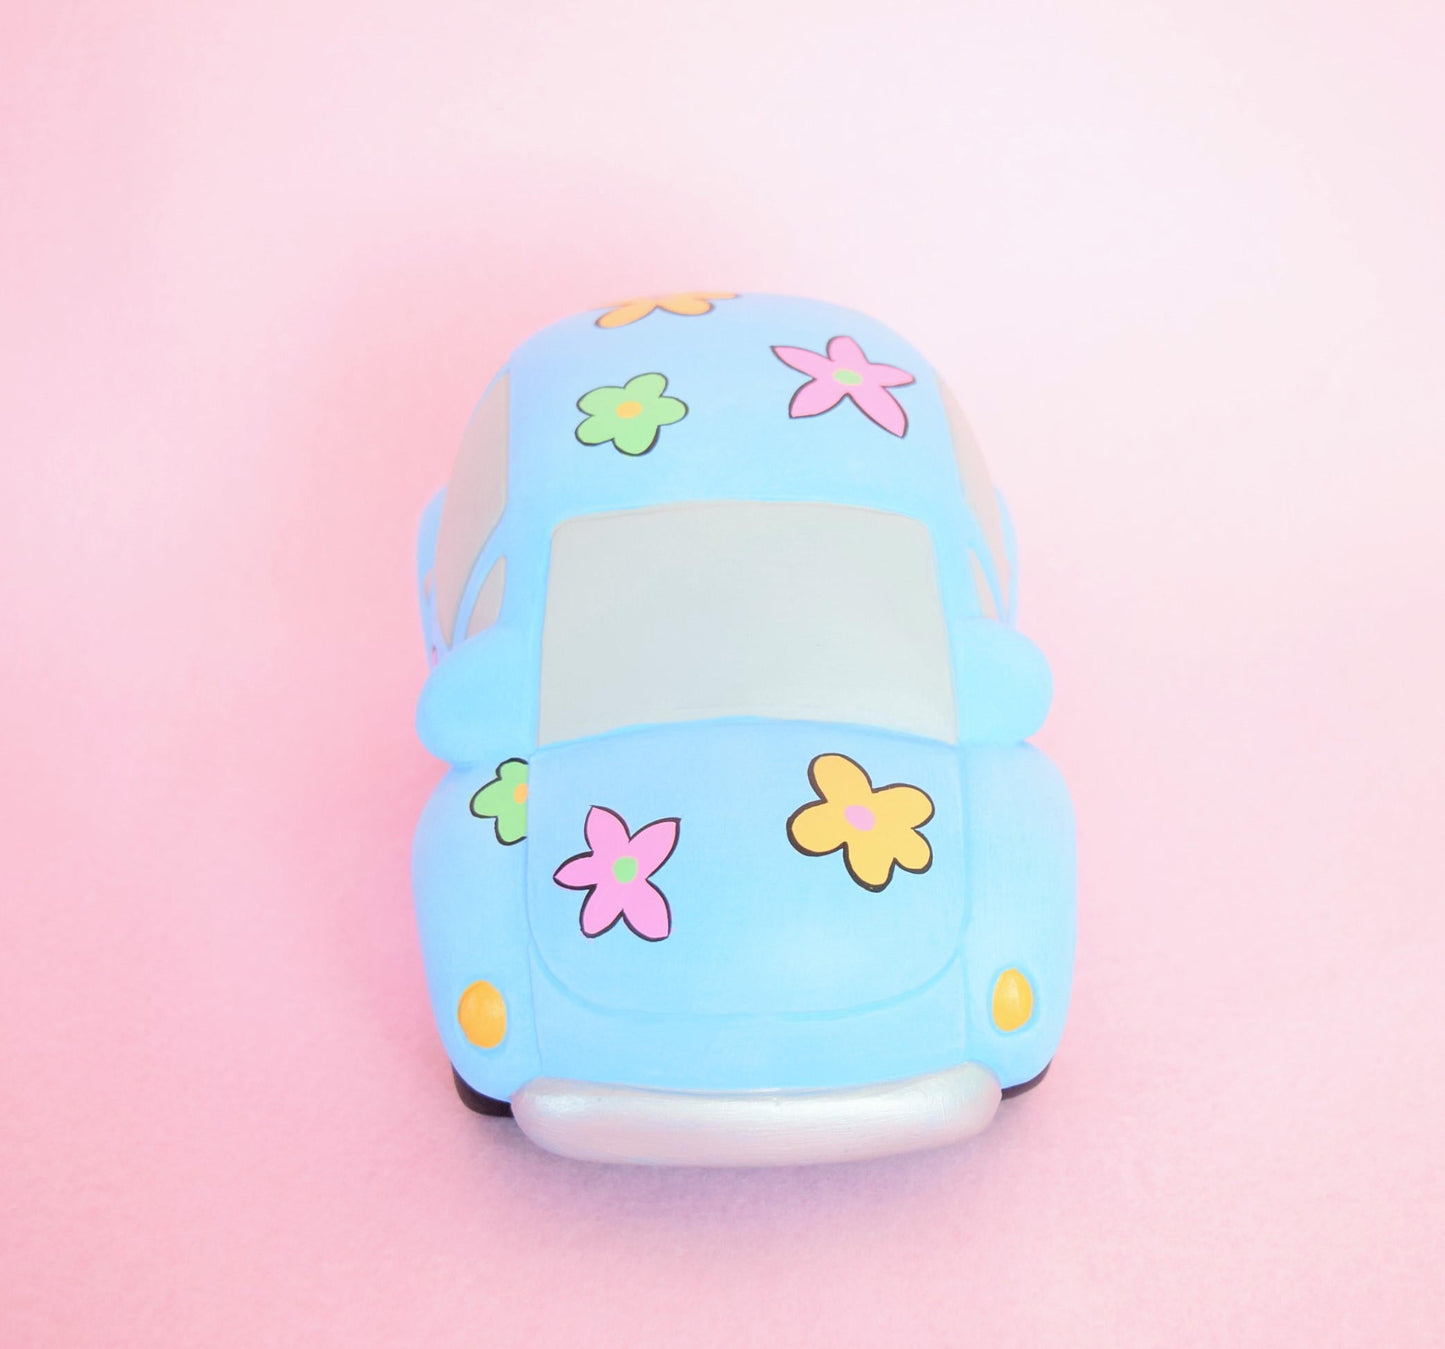 Volkswagen Beetle - VW Car - Flower Power Car - Cute Blue  Volkswagon - VW collectible - Mothers Day gift - Volkswagon Decoration